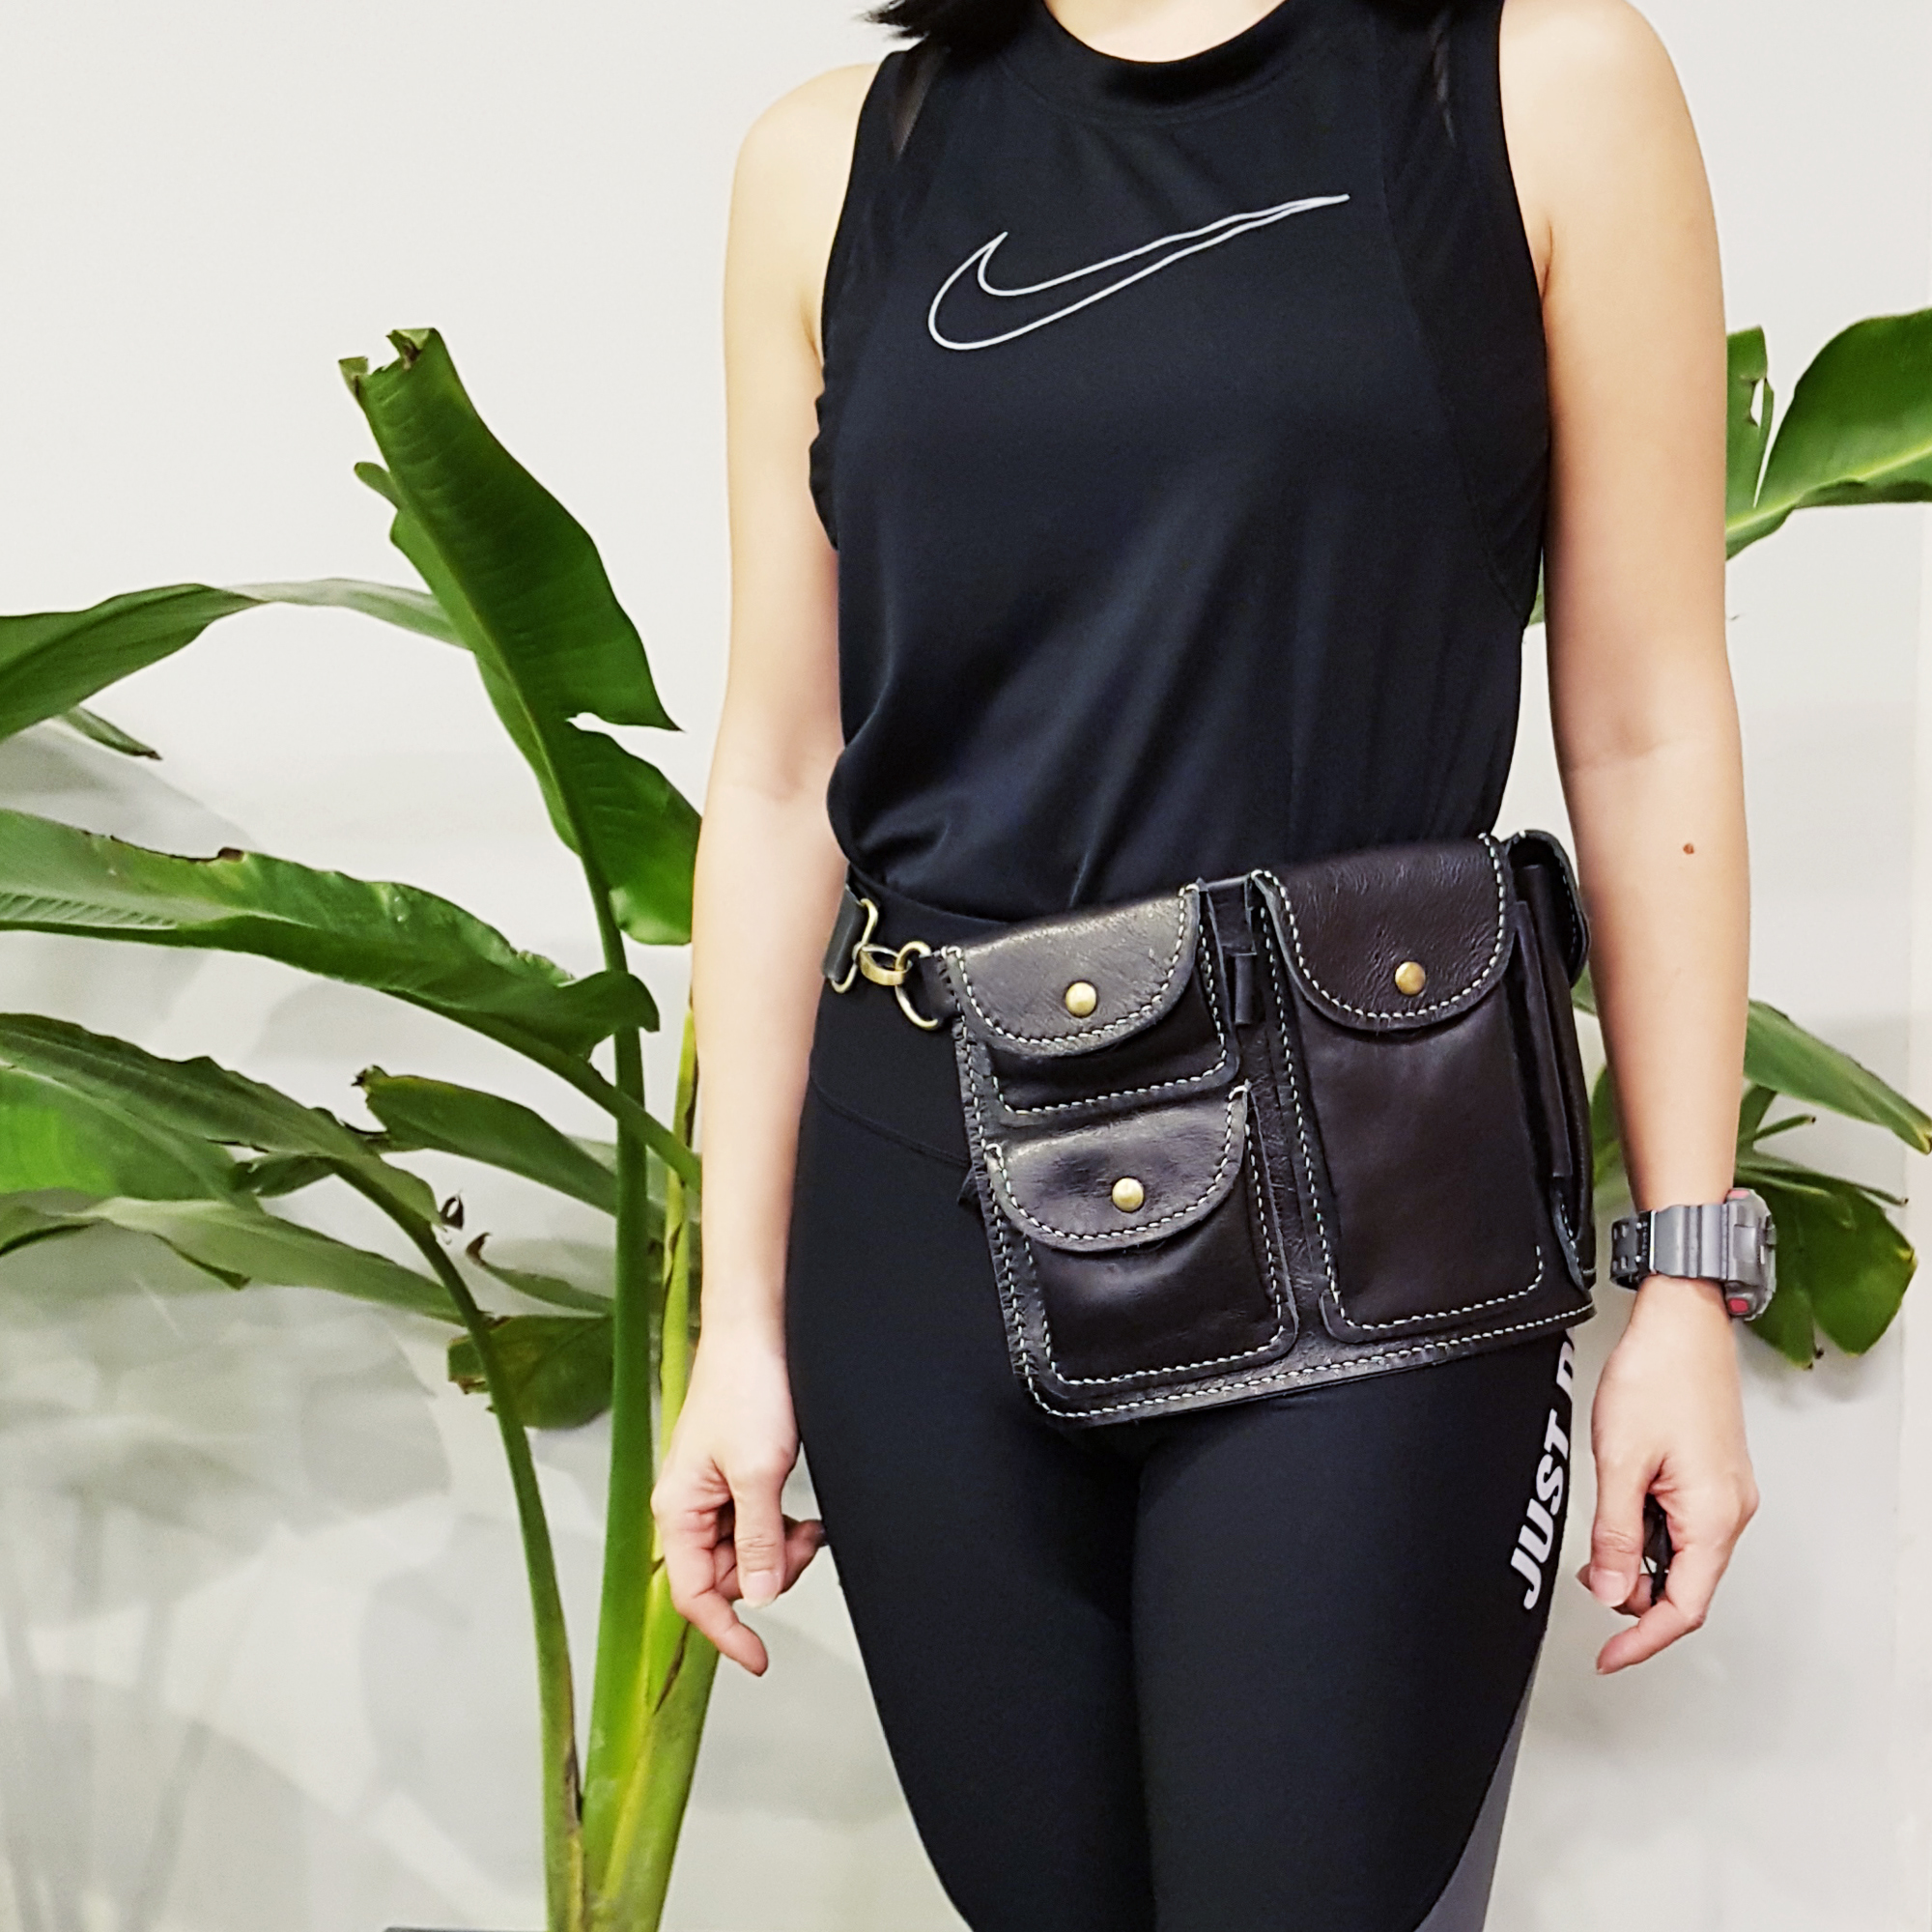 Black Fanny Pack for Women.leather Crossbody Fanny Pack 